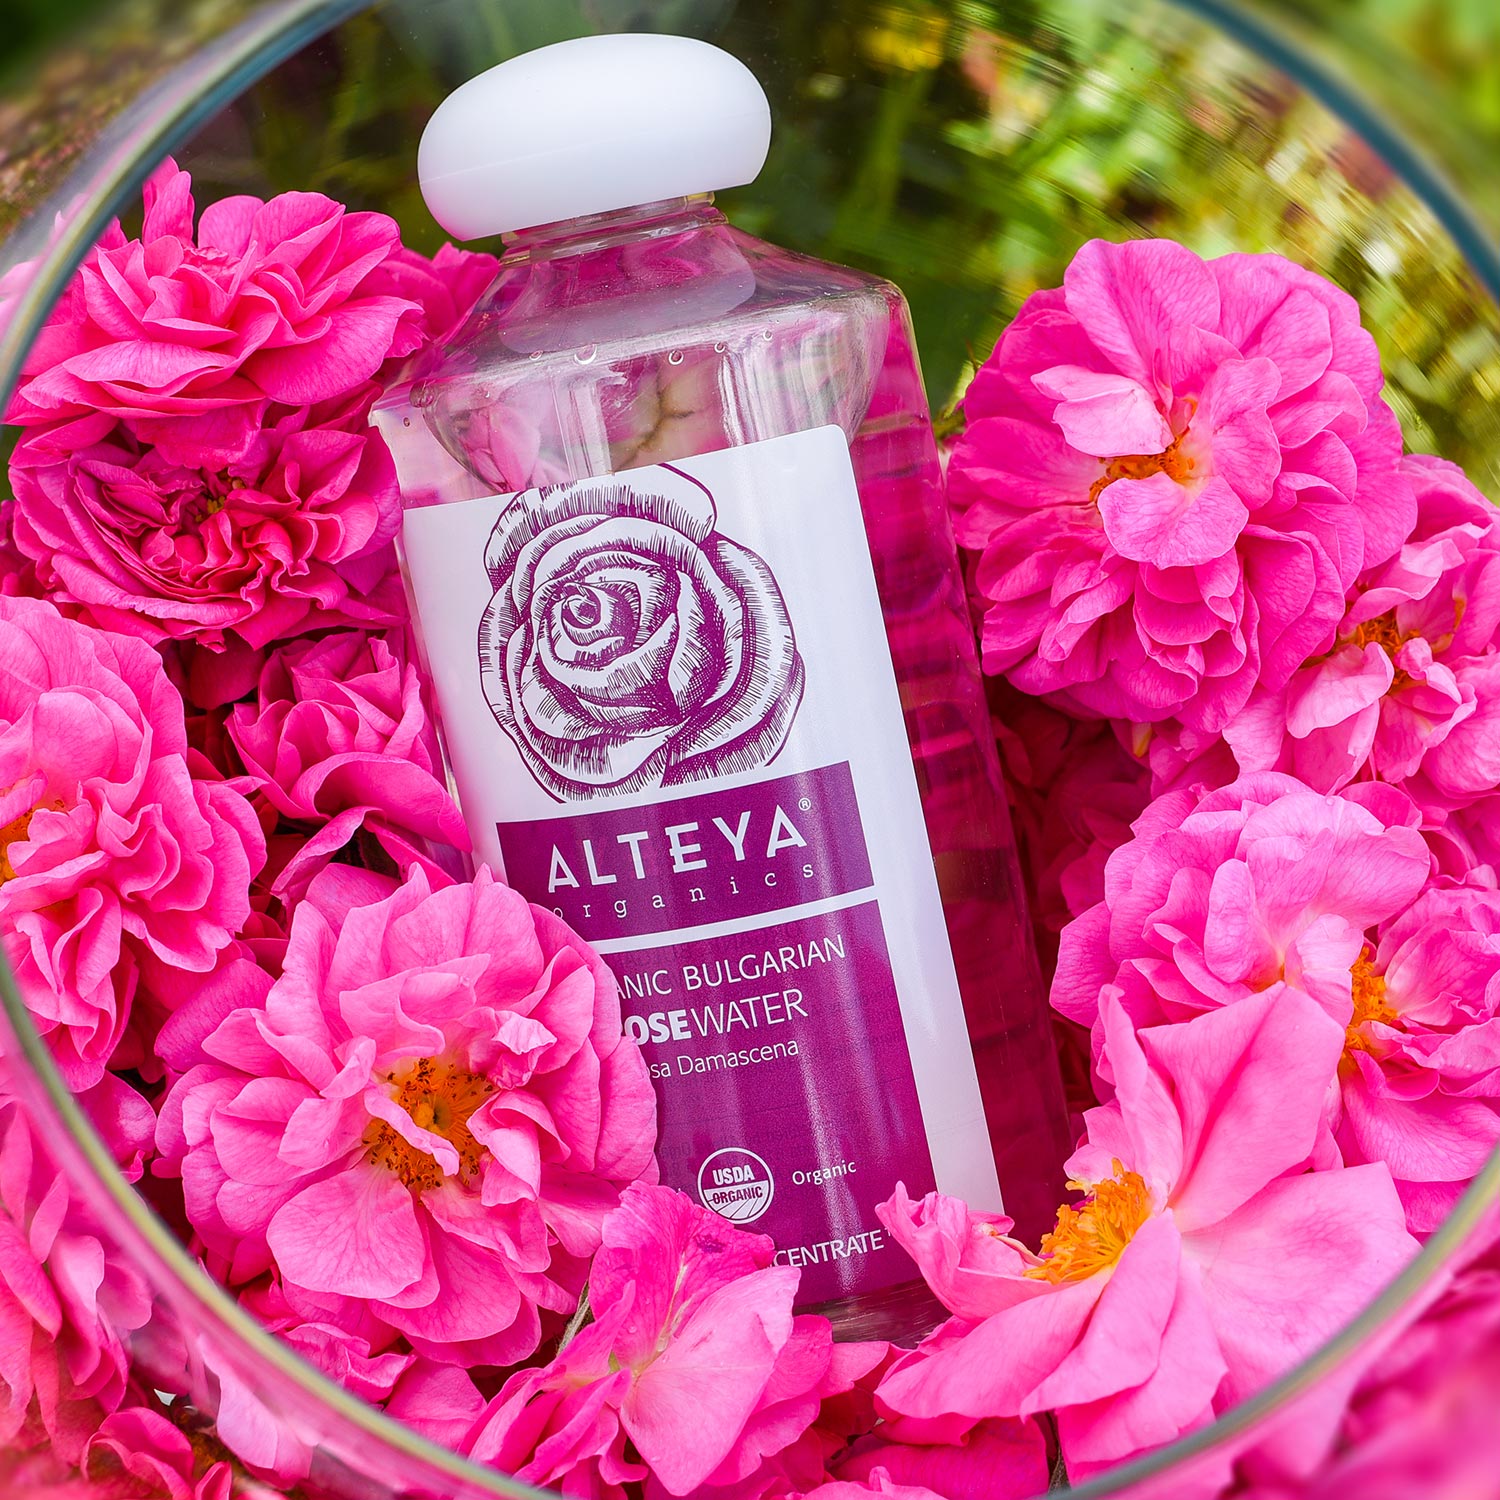 A bottle of Alteya Organics Organic Bulgarian Rose Water - 17 Fl Oz, perfect for skincare hydration, surrounded by pink flowers.